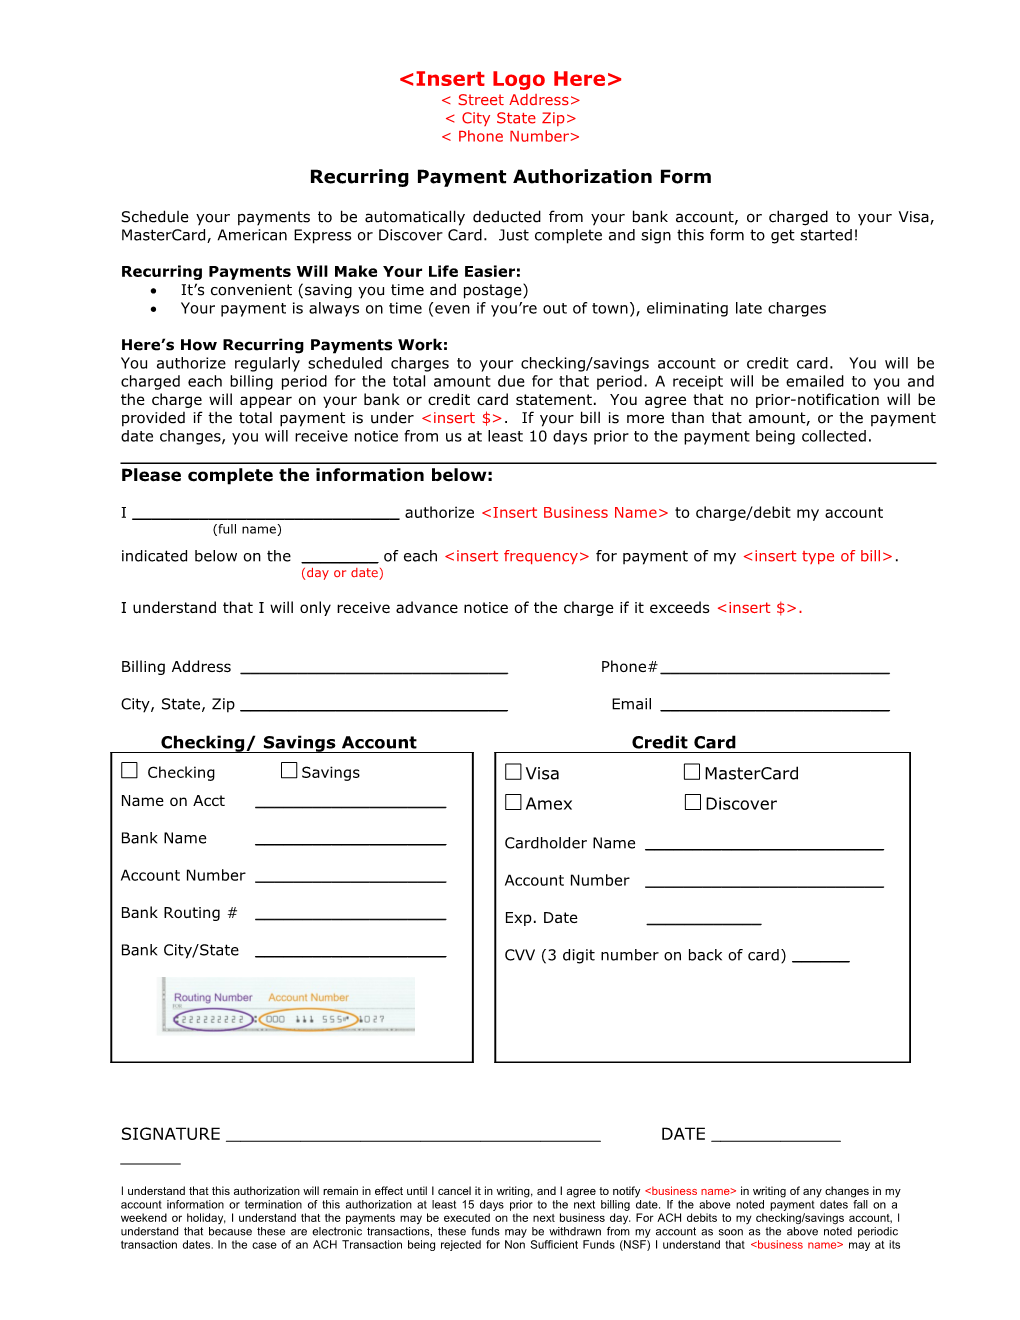 Recurring Payment Authorization Form Variable Amount ACH Or CC Payment